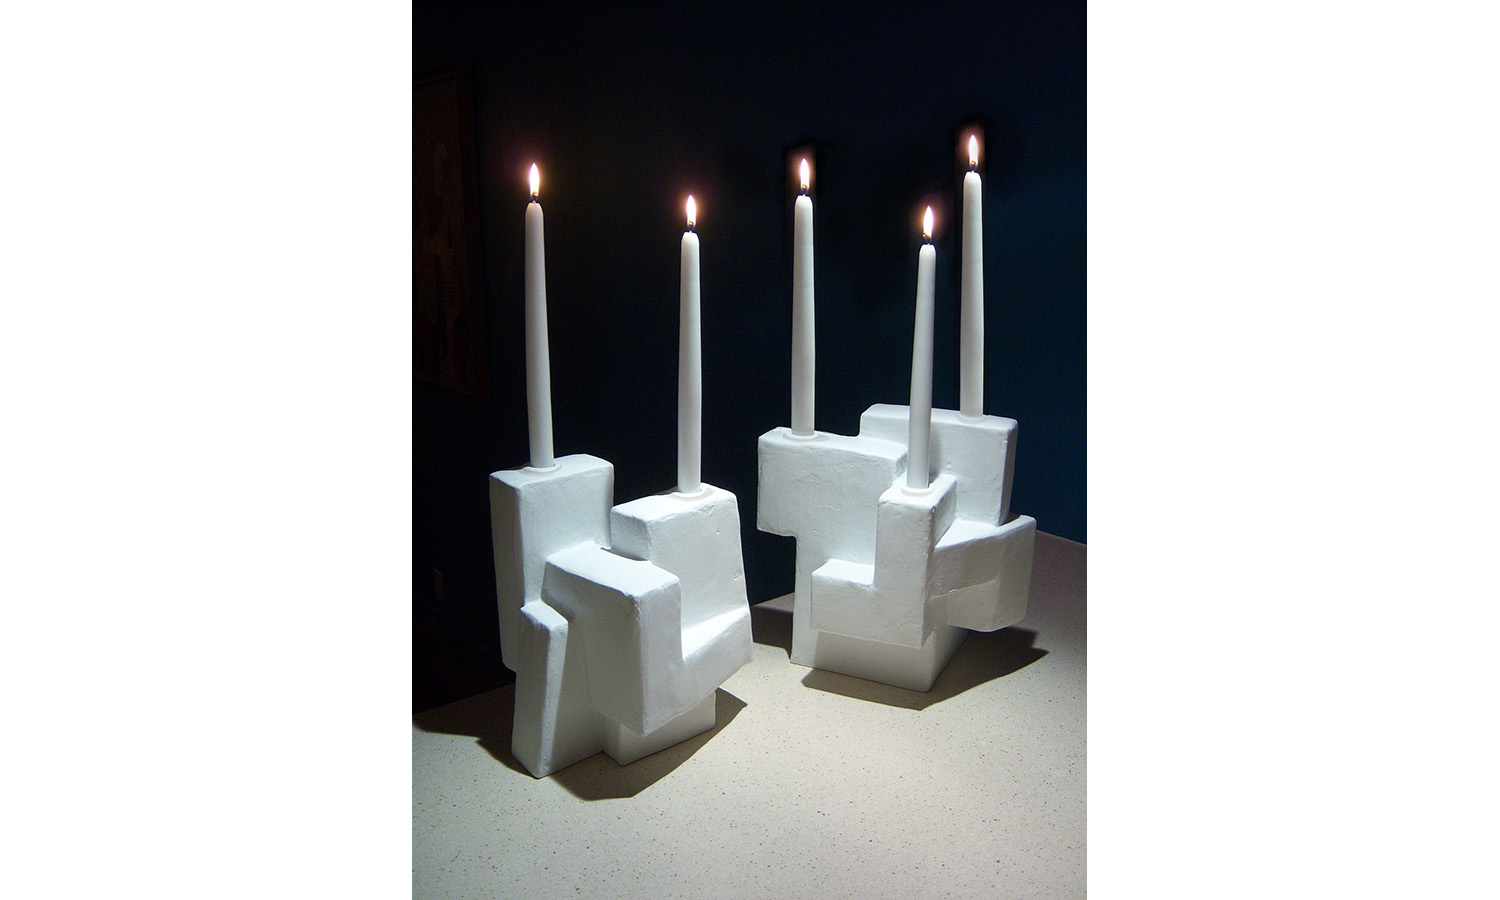 CANDLE HOLDERS, mixed media, 7" x 9" x 10" each, 2012